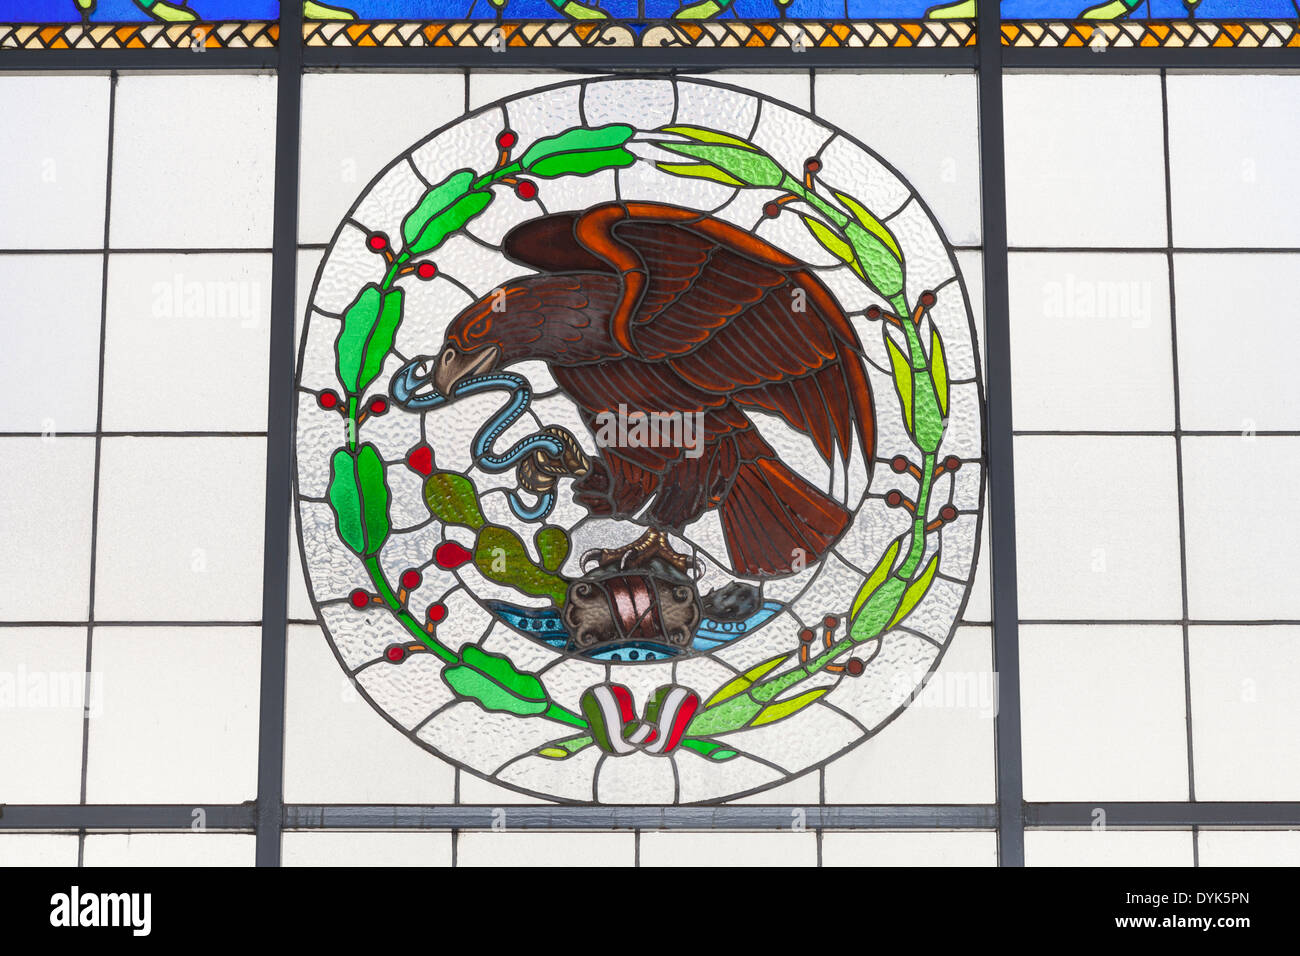 Stained glass window depicting the coat of arms of Mexico in Chapultepec Castle Stock Photo